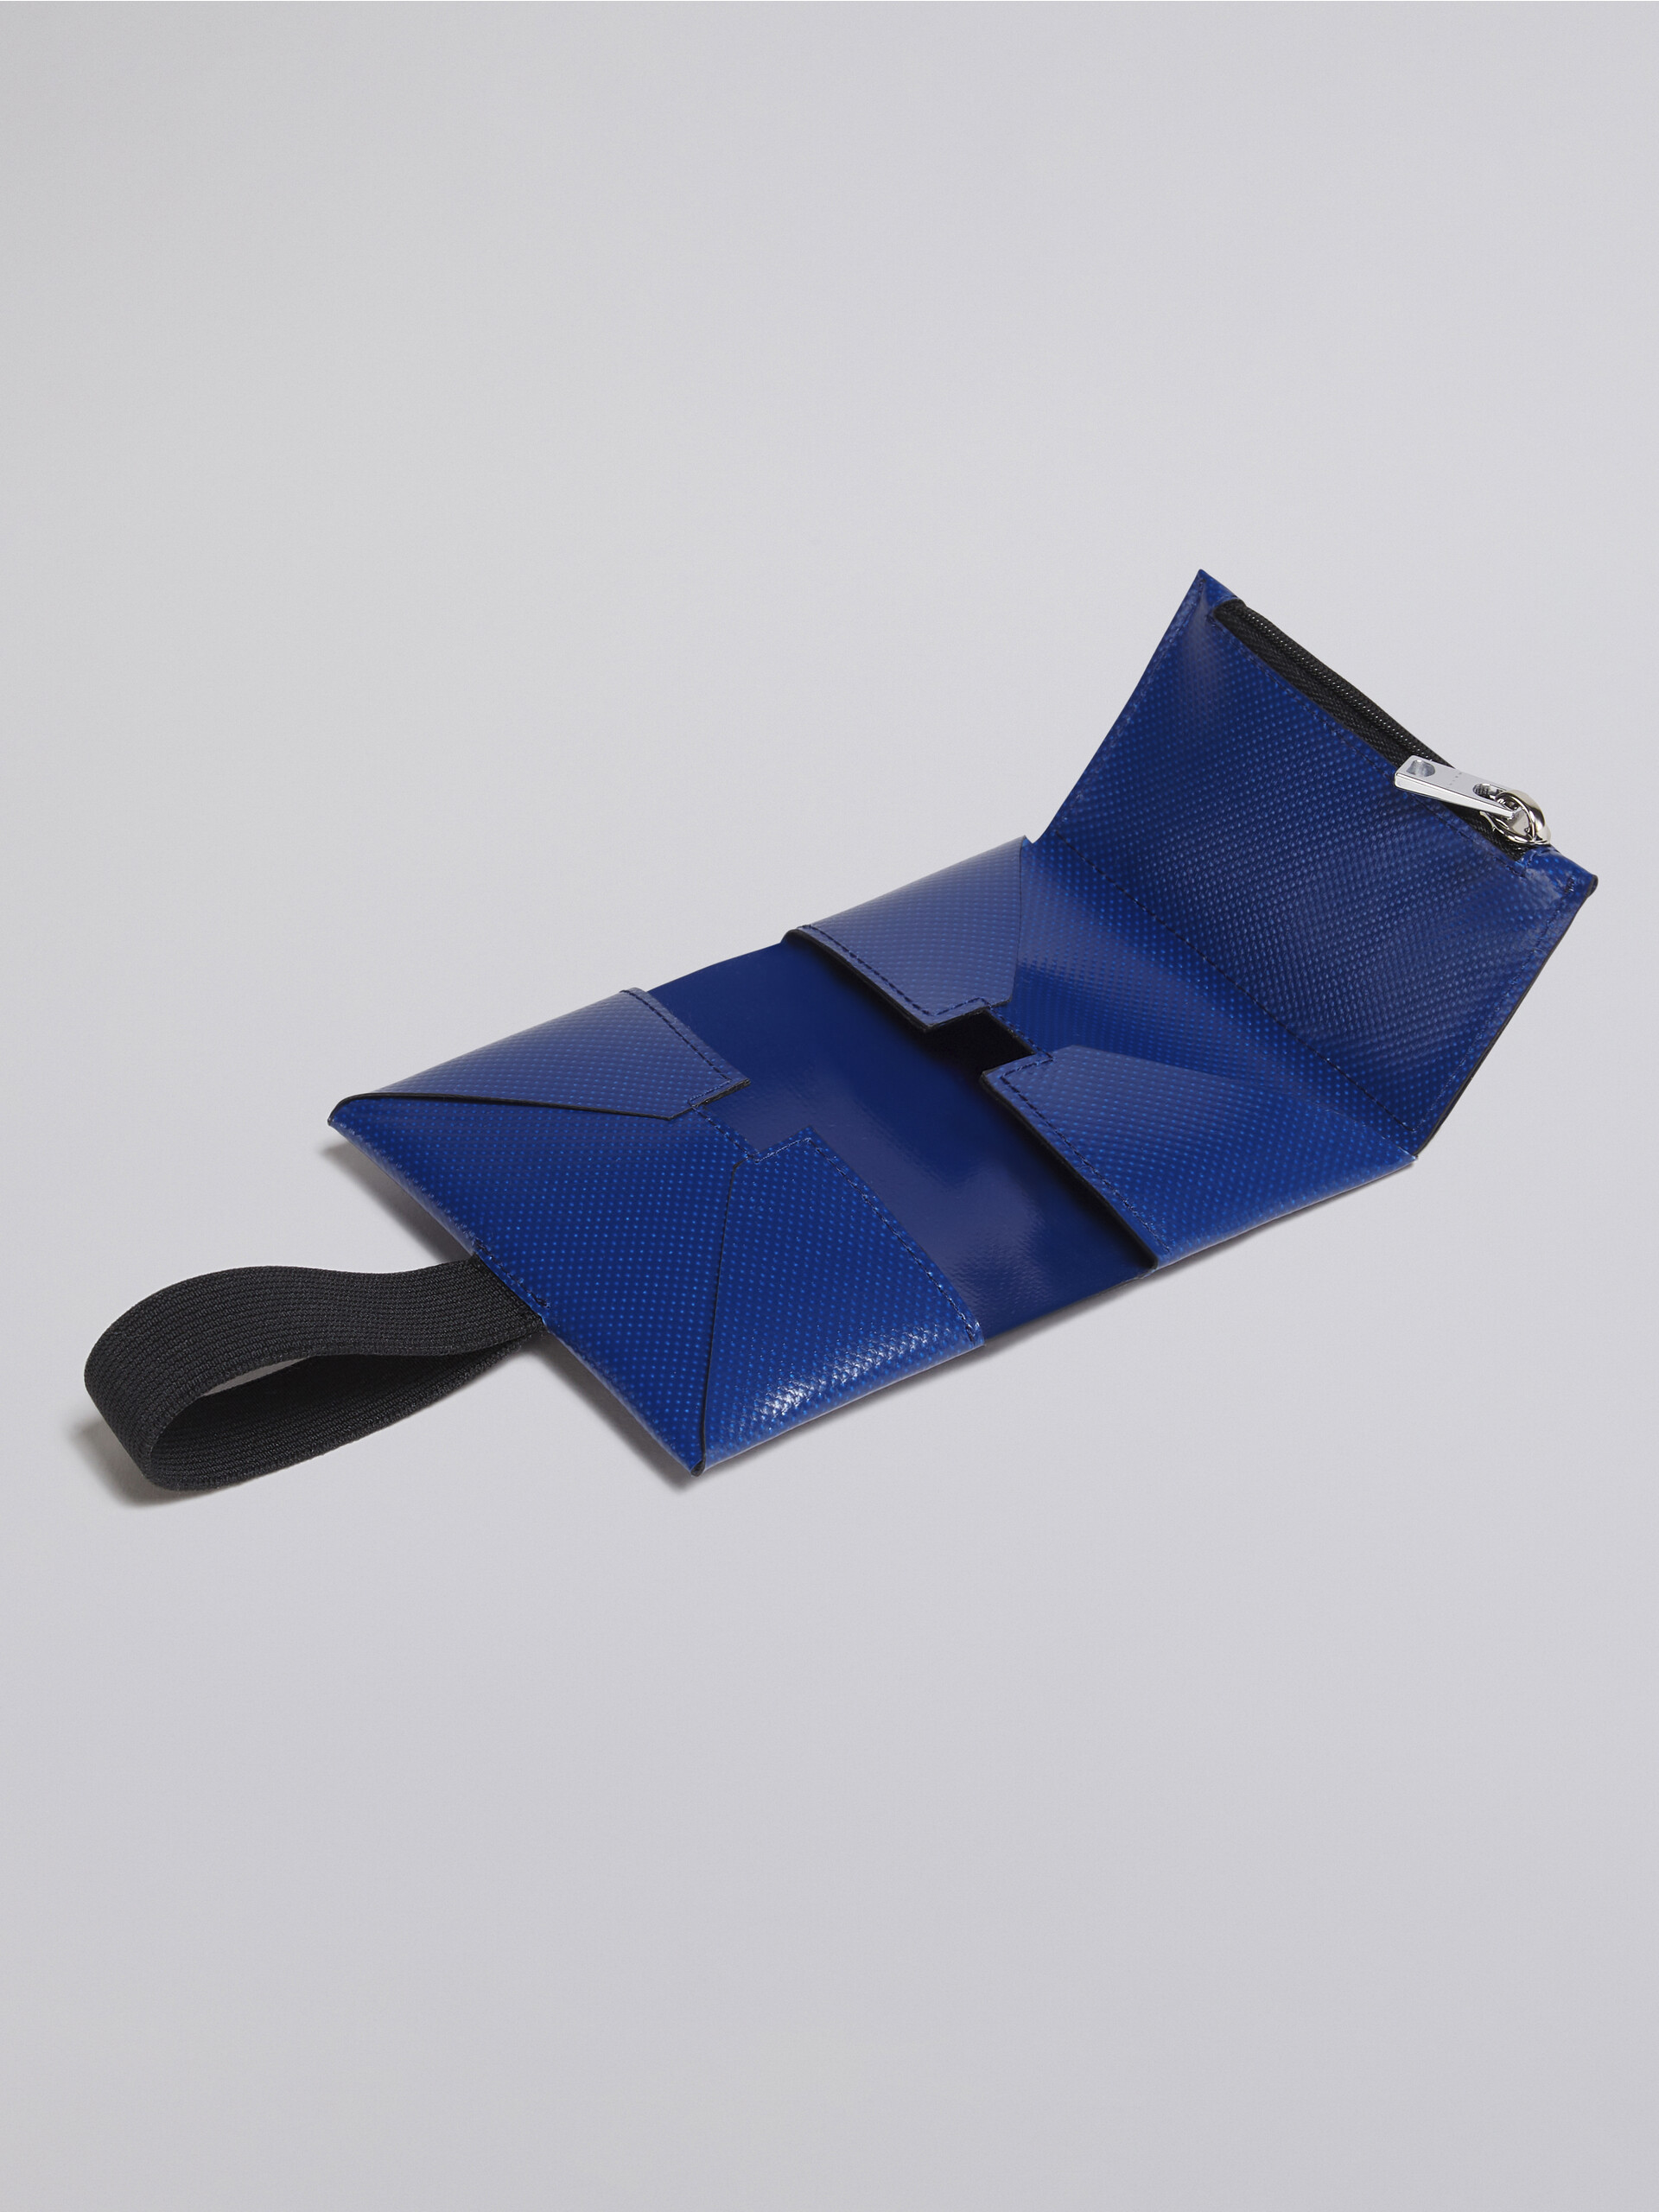 PVC wallet with blue origami construction - Wallets - Image 5